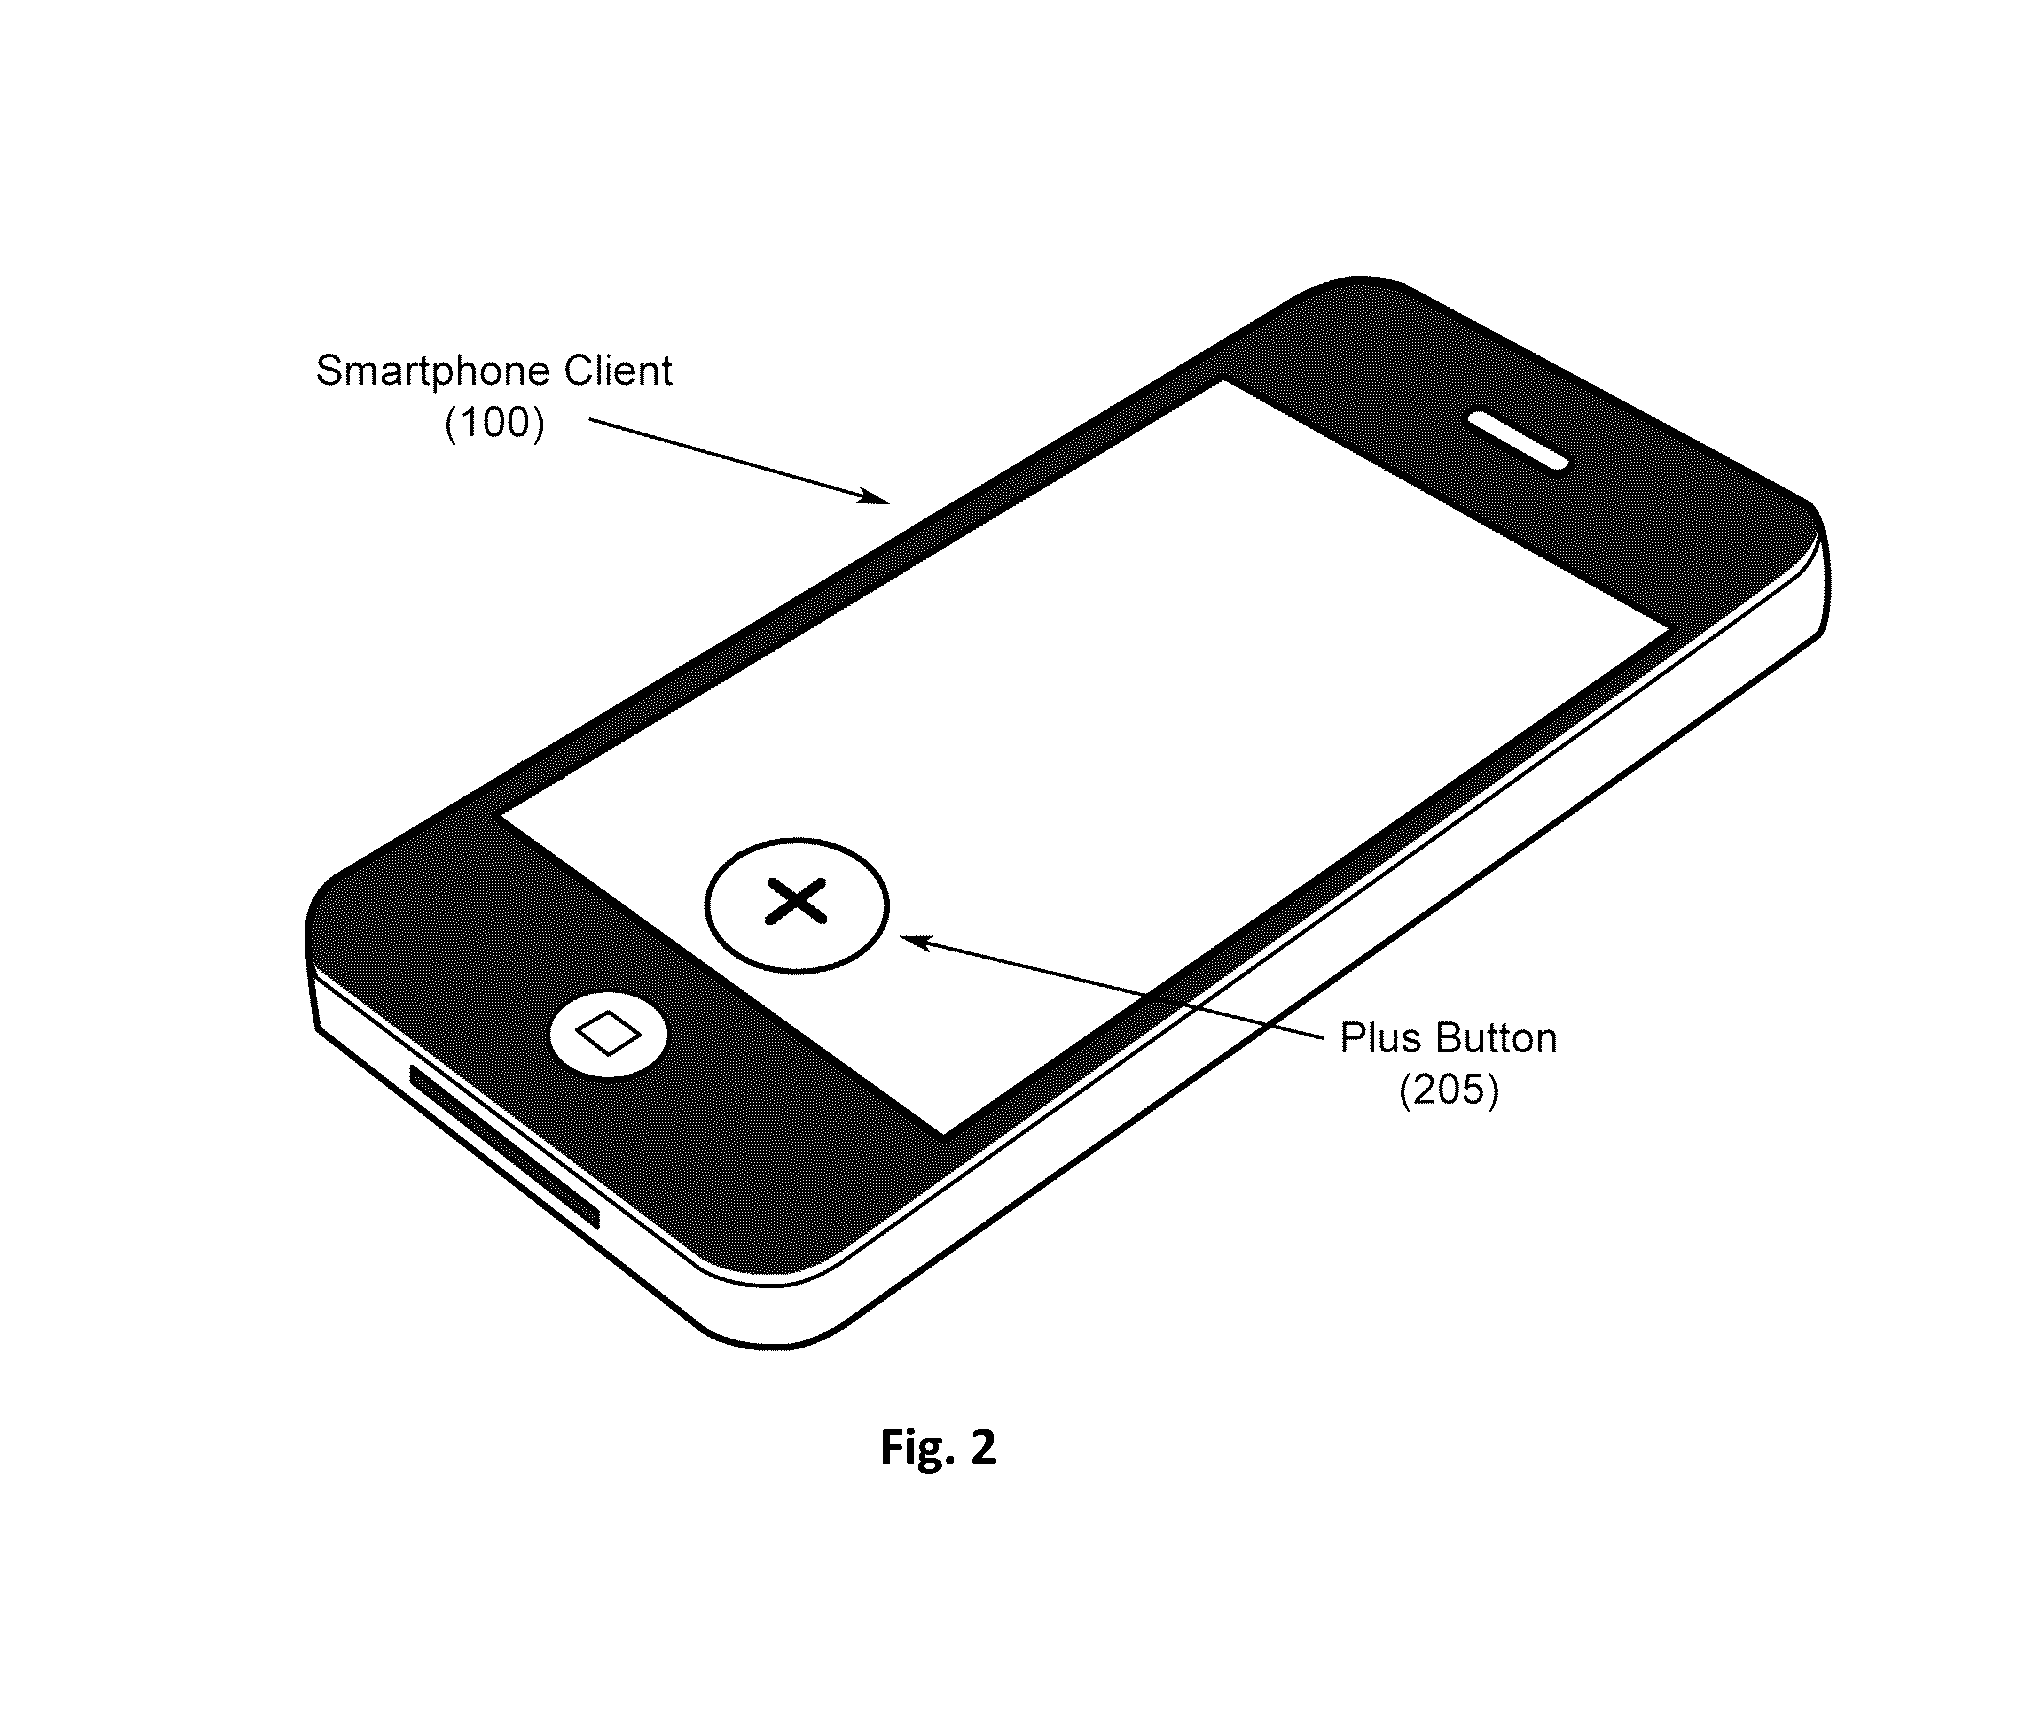 Methods and systems for verifying ownership of a physical work or facilitating access to an electronic resource associated with a physical work